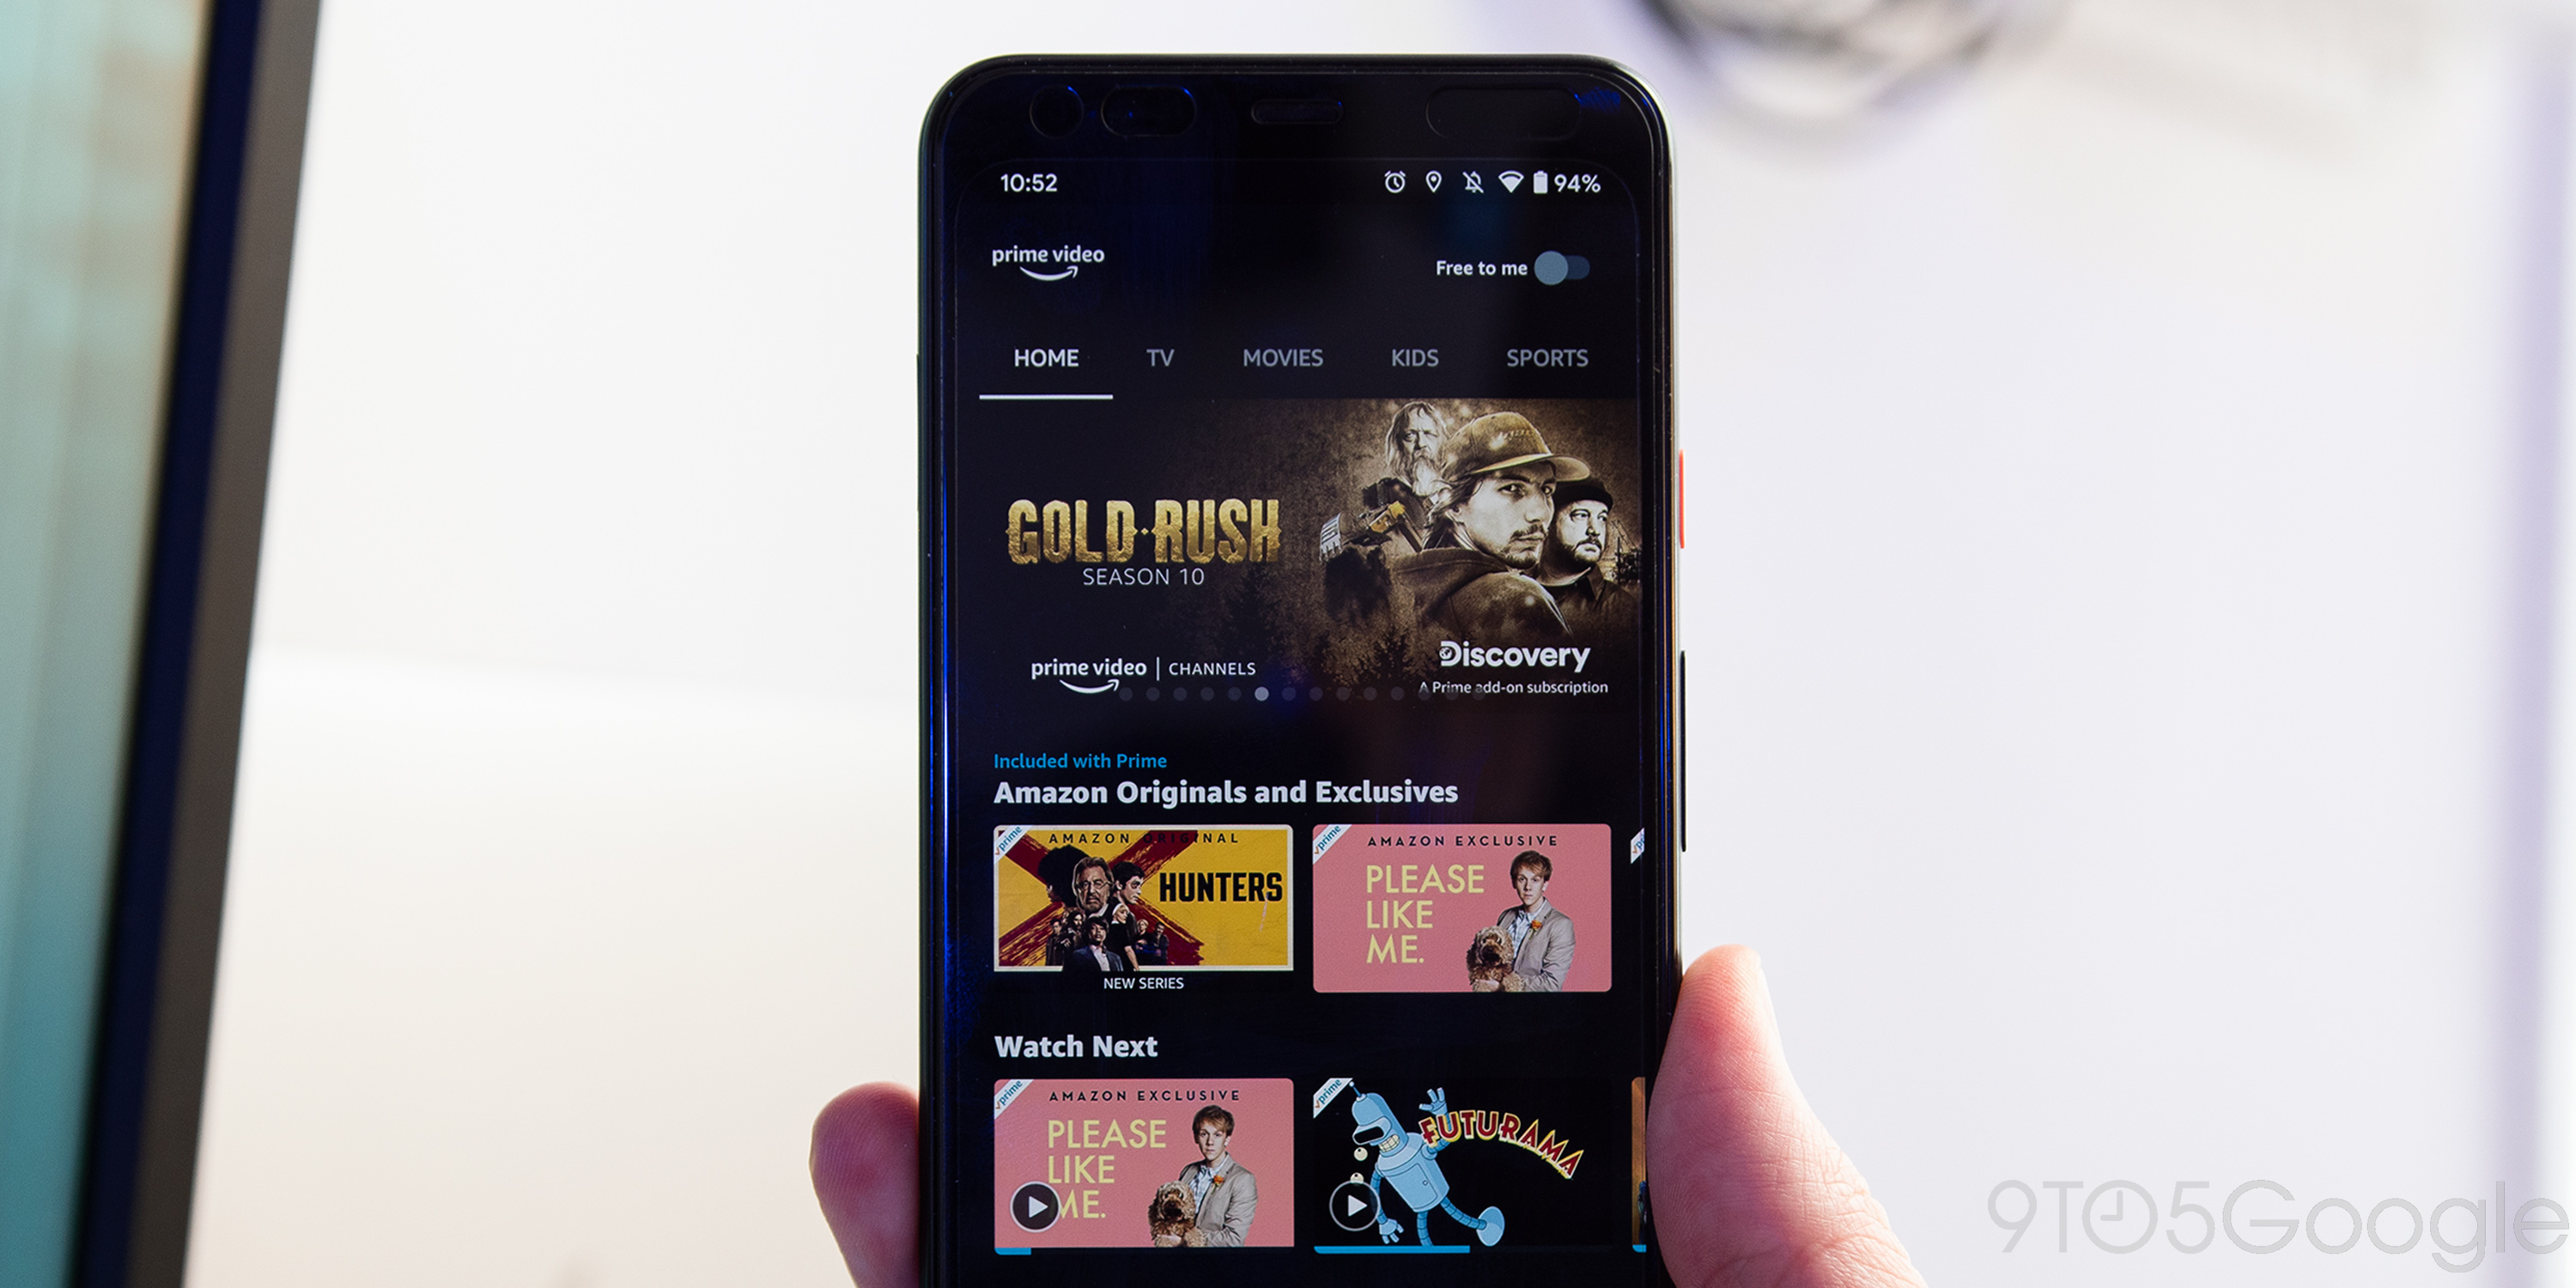 how to add device to amazon prime videos